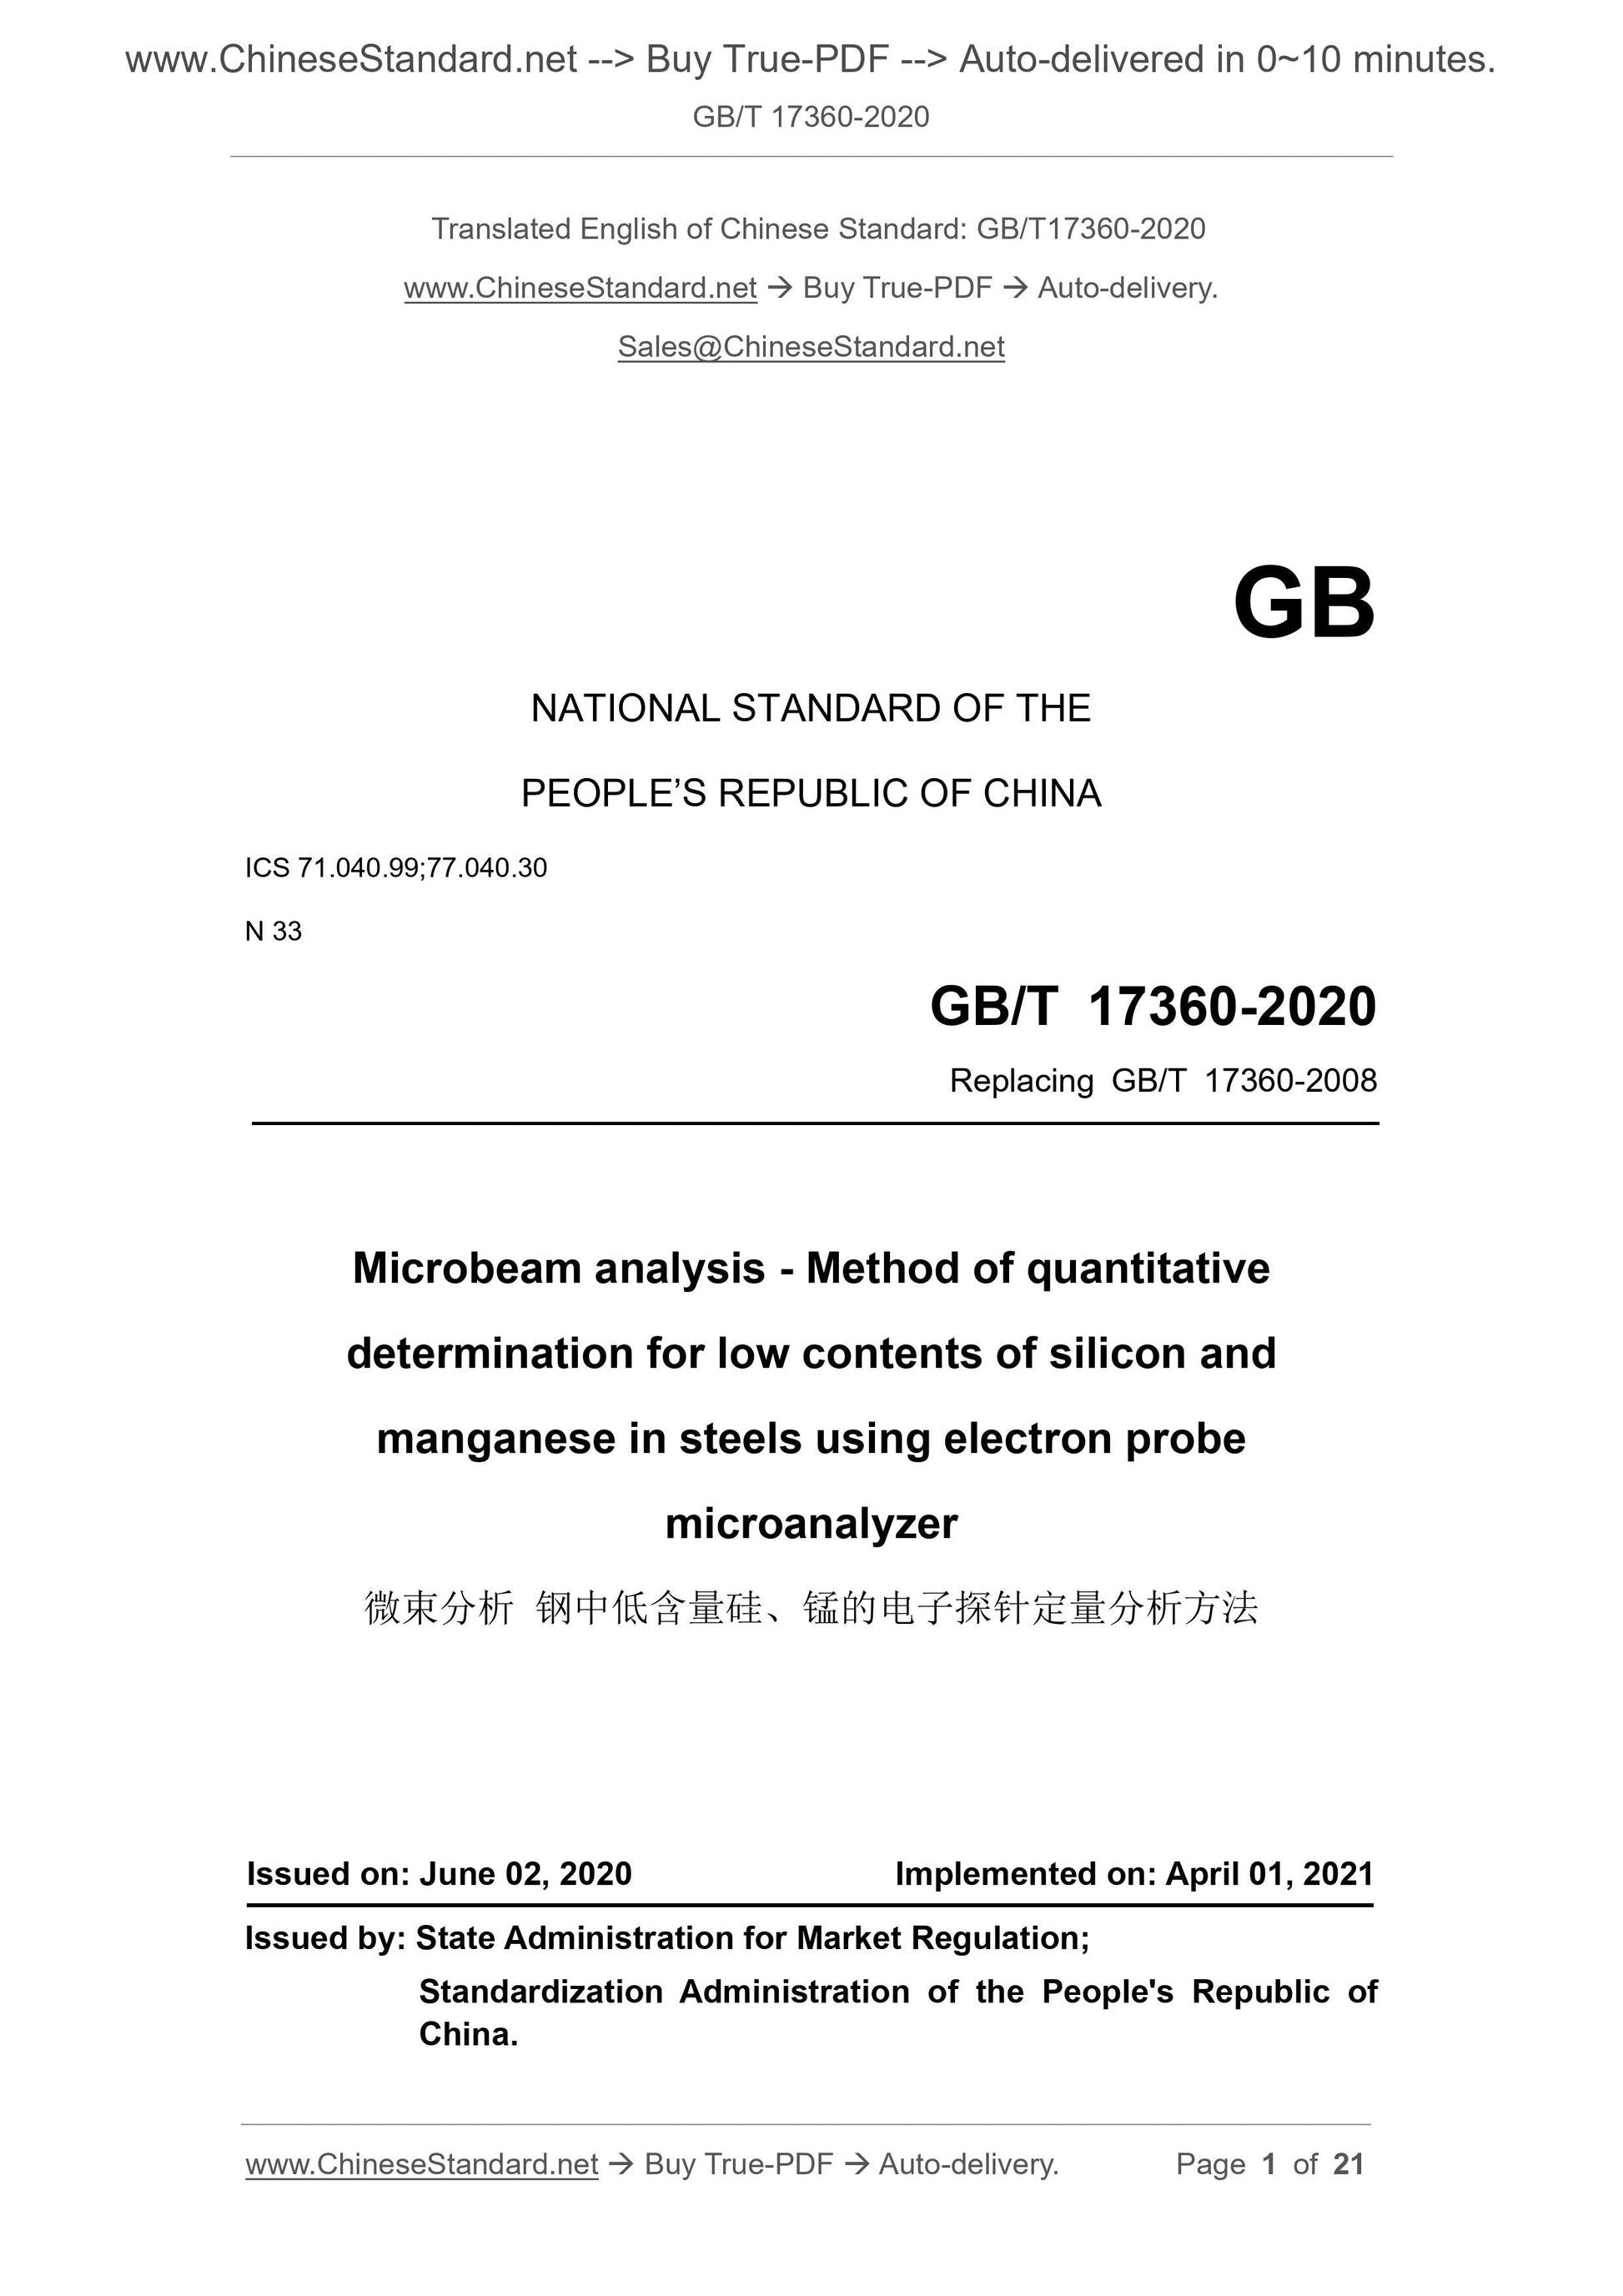 GB/T 17360-2020 Page 1